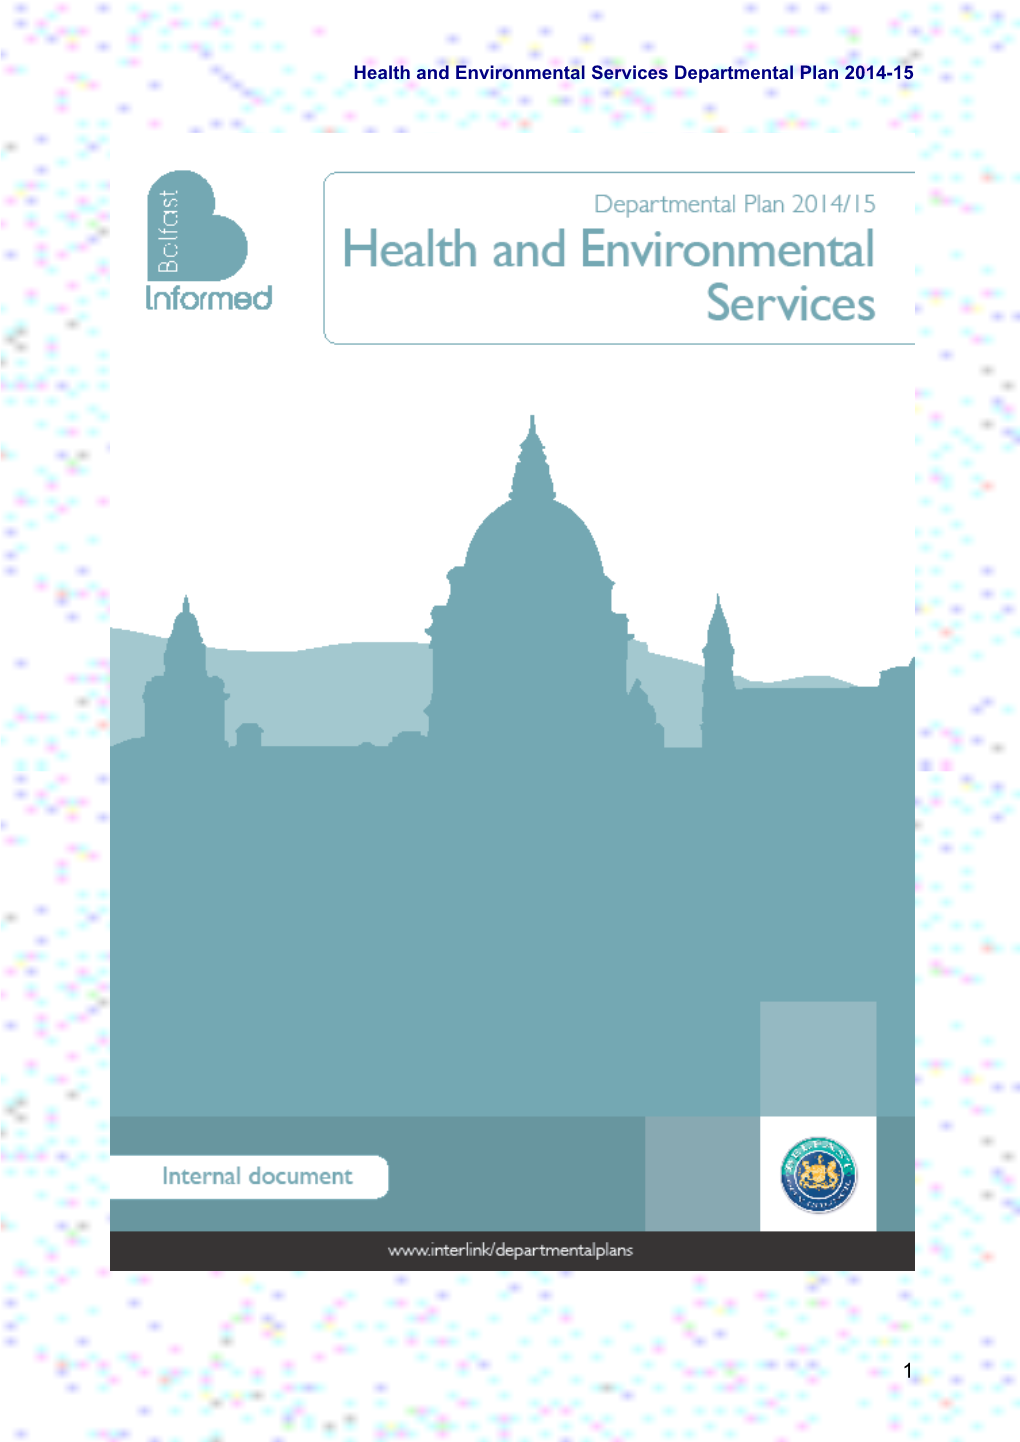 Health and Environmental Services Departmental Plan 2014-15